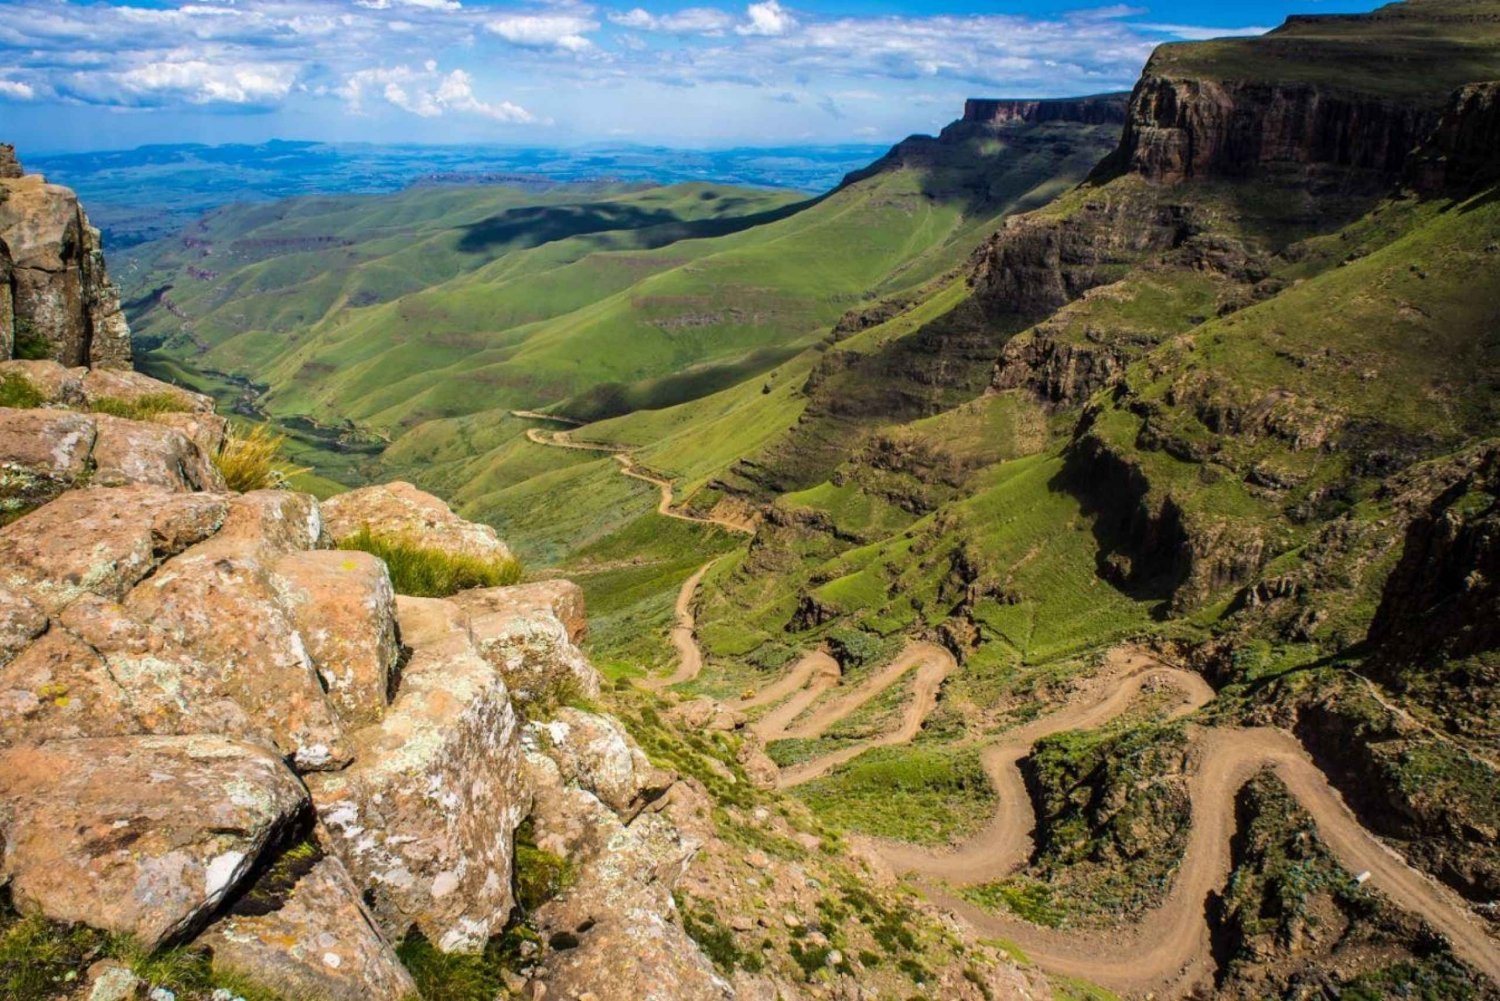 Full Day Sani Pass & Lesotho Tour from Durban